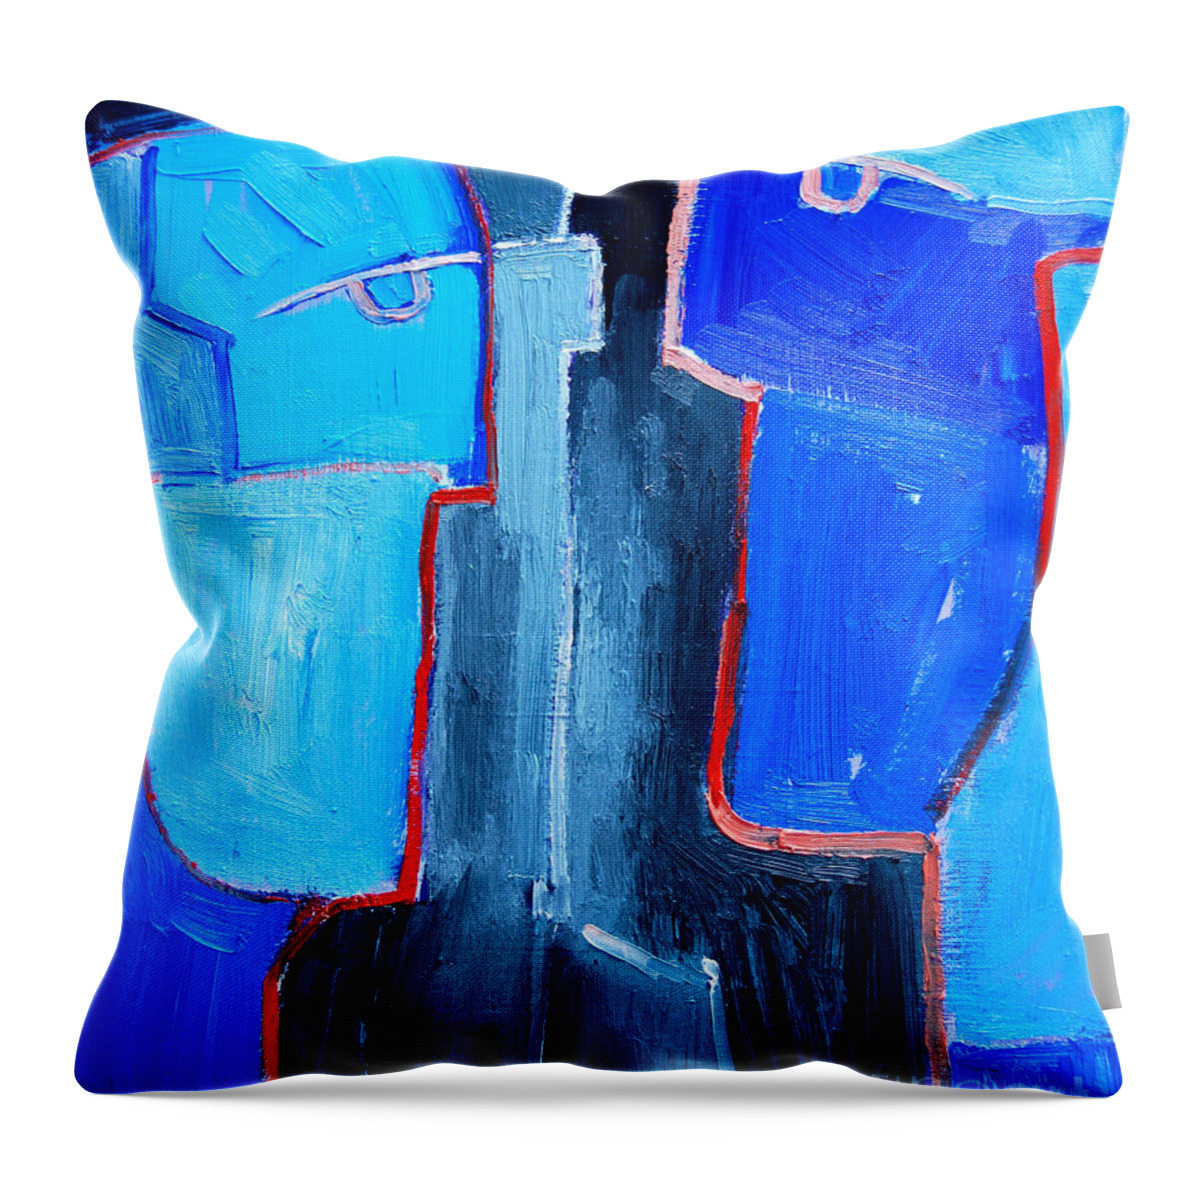 Abstract Throw Pillow featuring the painting Translucent Togetherness by Ana Maria Edulescu